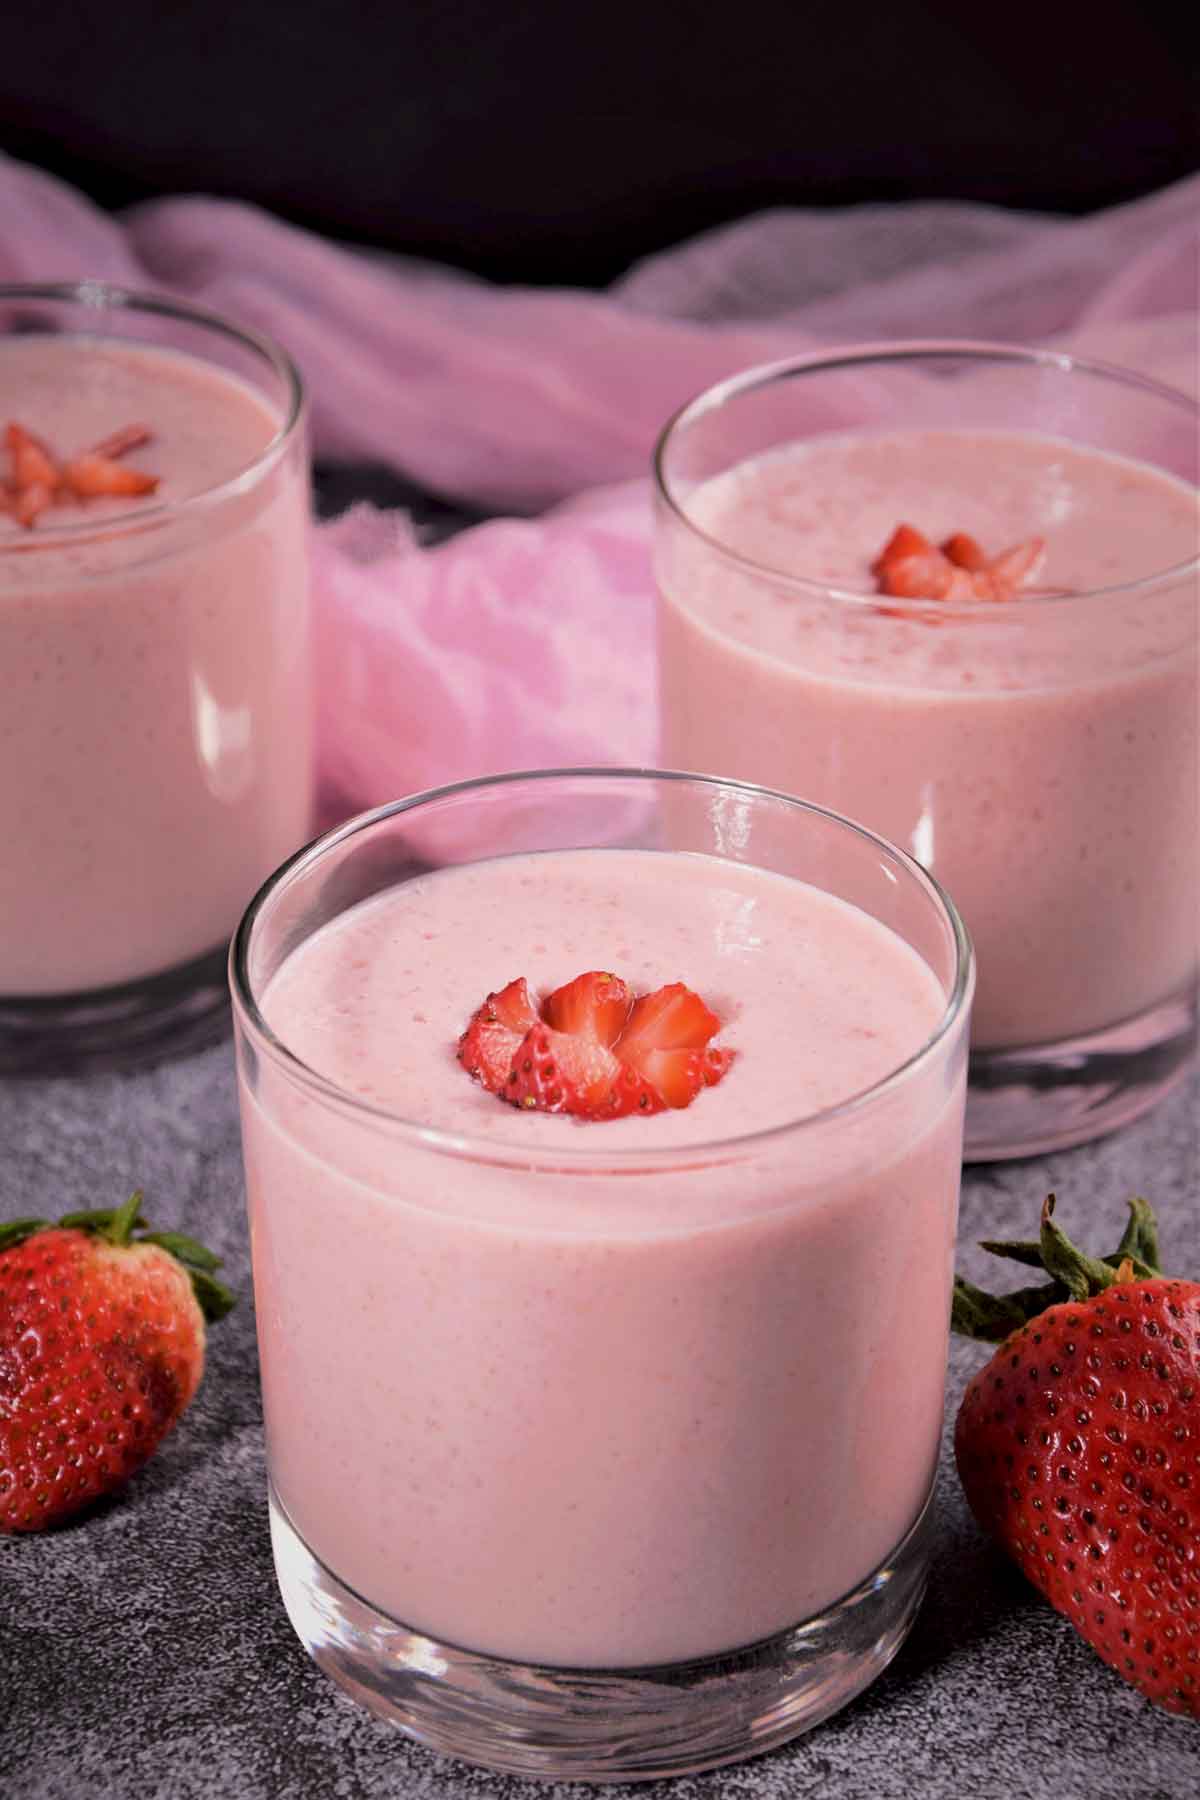 Strawberry milkshake served in a glass and topped with strawberry.